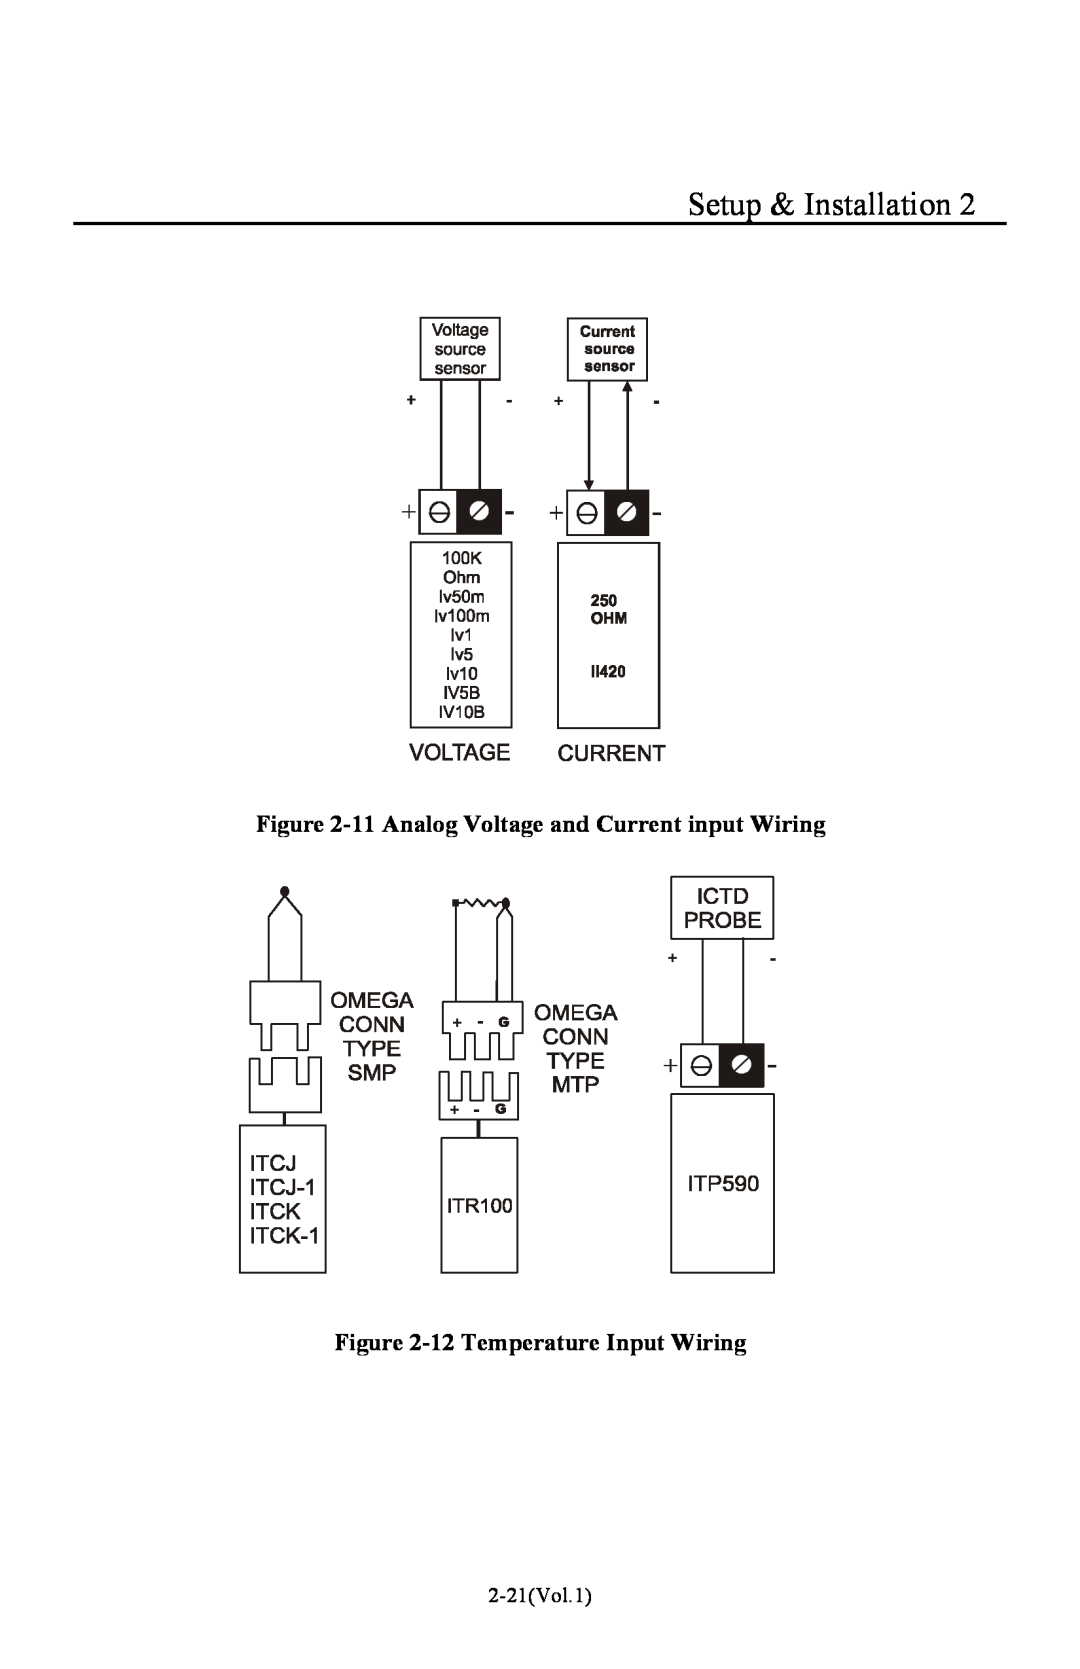 I-O Display Systems Basic I/O Product manual Setup & Installation, 11 Analog Voltage and Current input Wiring, 2-21Vol.1 